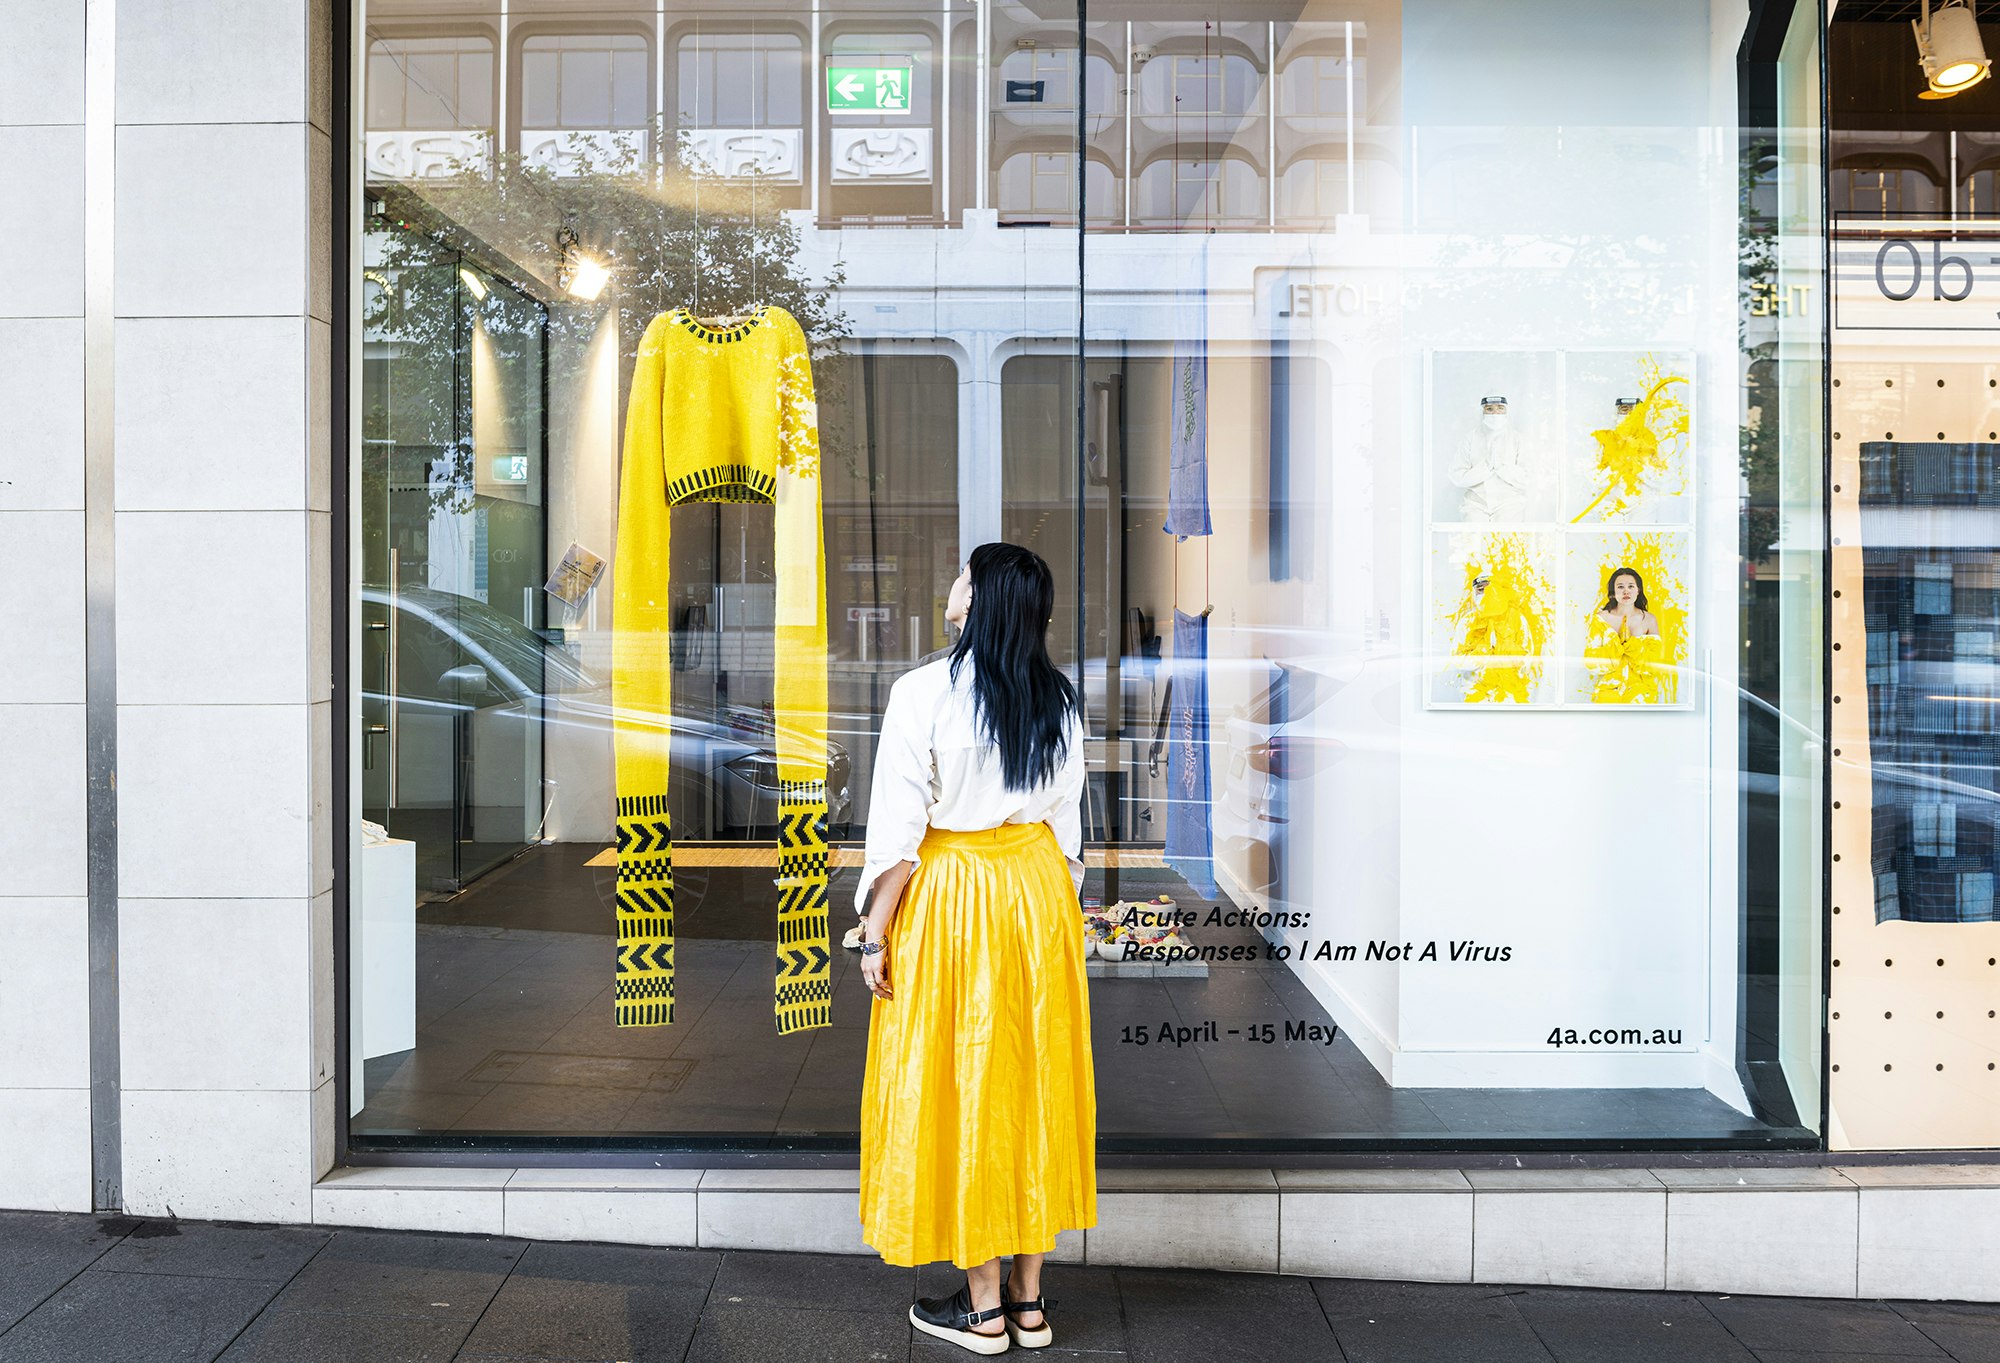 A woman with long black hair in a white blouse and yellow full-length skirt stands on a street outside a gallery glass front, looking at a yellow knitted sweater with sleeves knitted to be 1.5 metres long. The decal sign on the glass front reads 'Acute Actions: Responses to I Am Not A Virus. 15 April - 15 May'